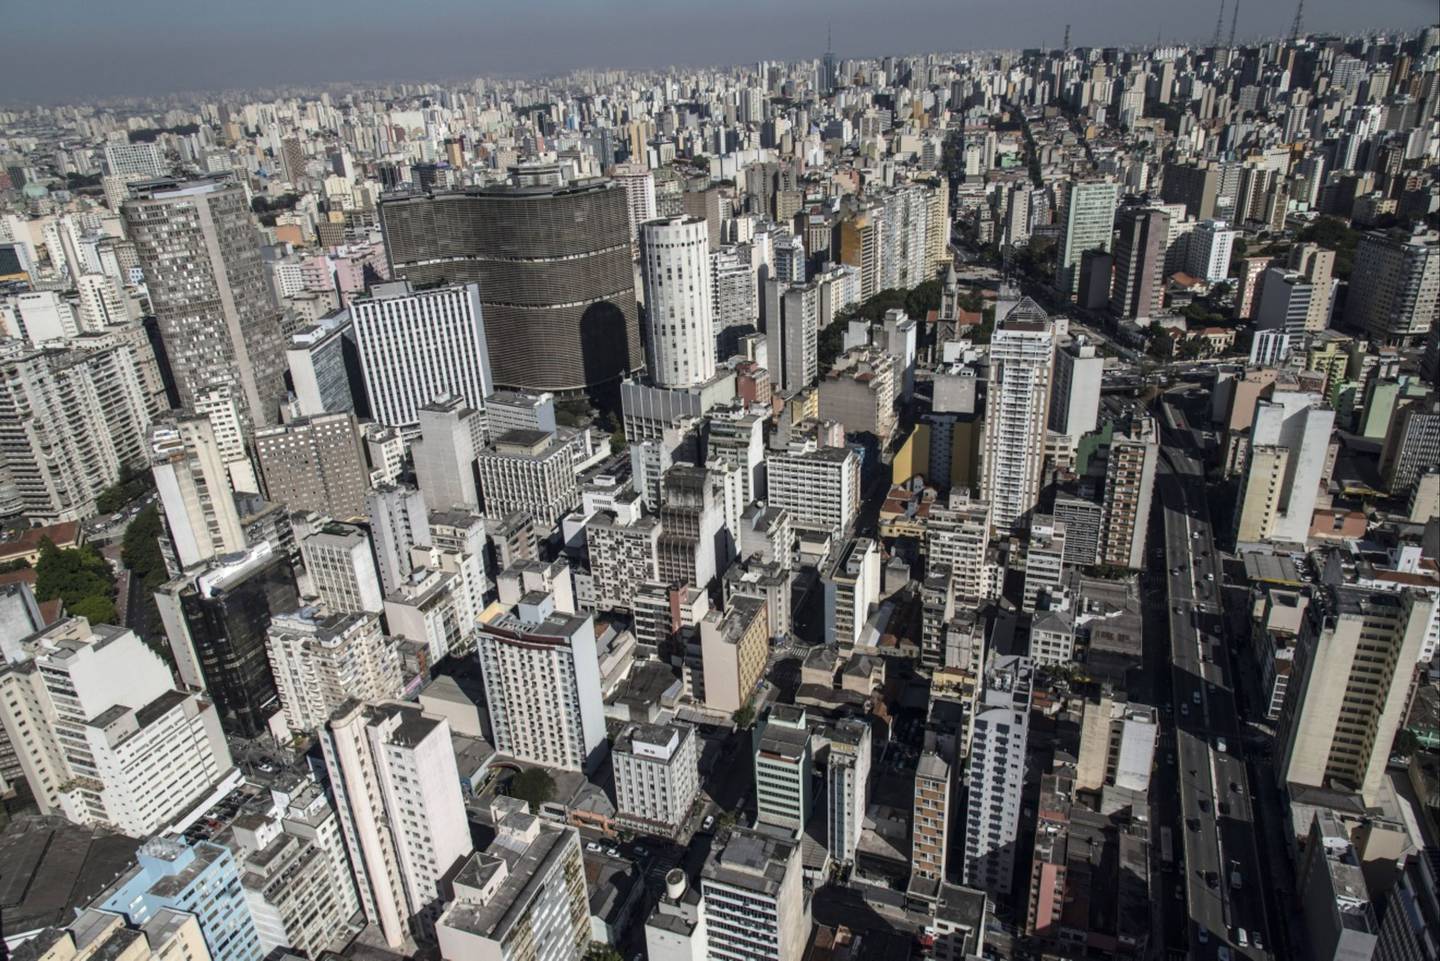 Brazil's main inflation gauge slowed for a second month in August and most economists think it will continue to ease, partially due to fuel tax cuts.